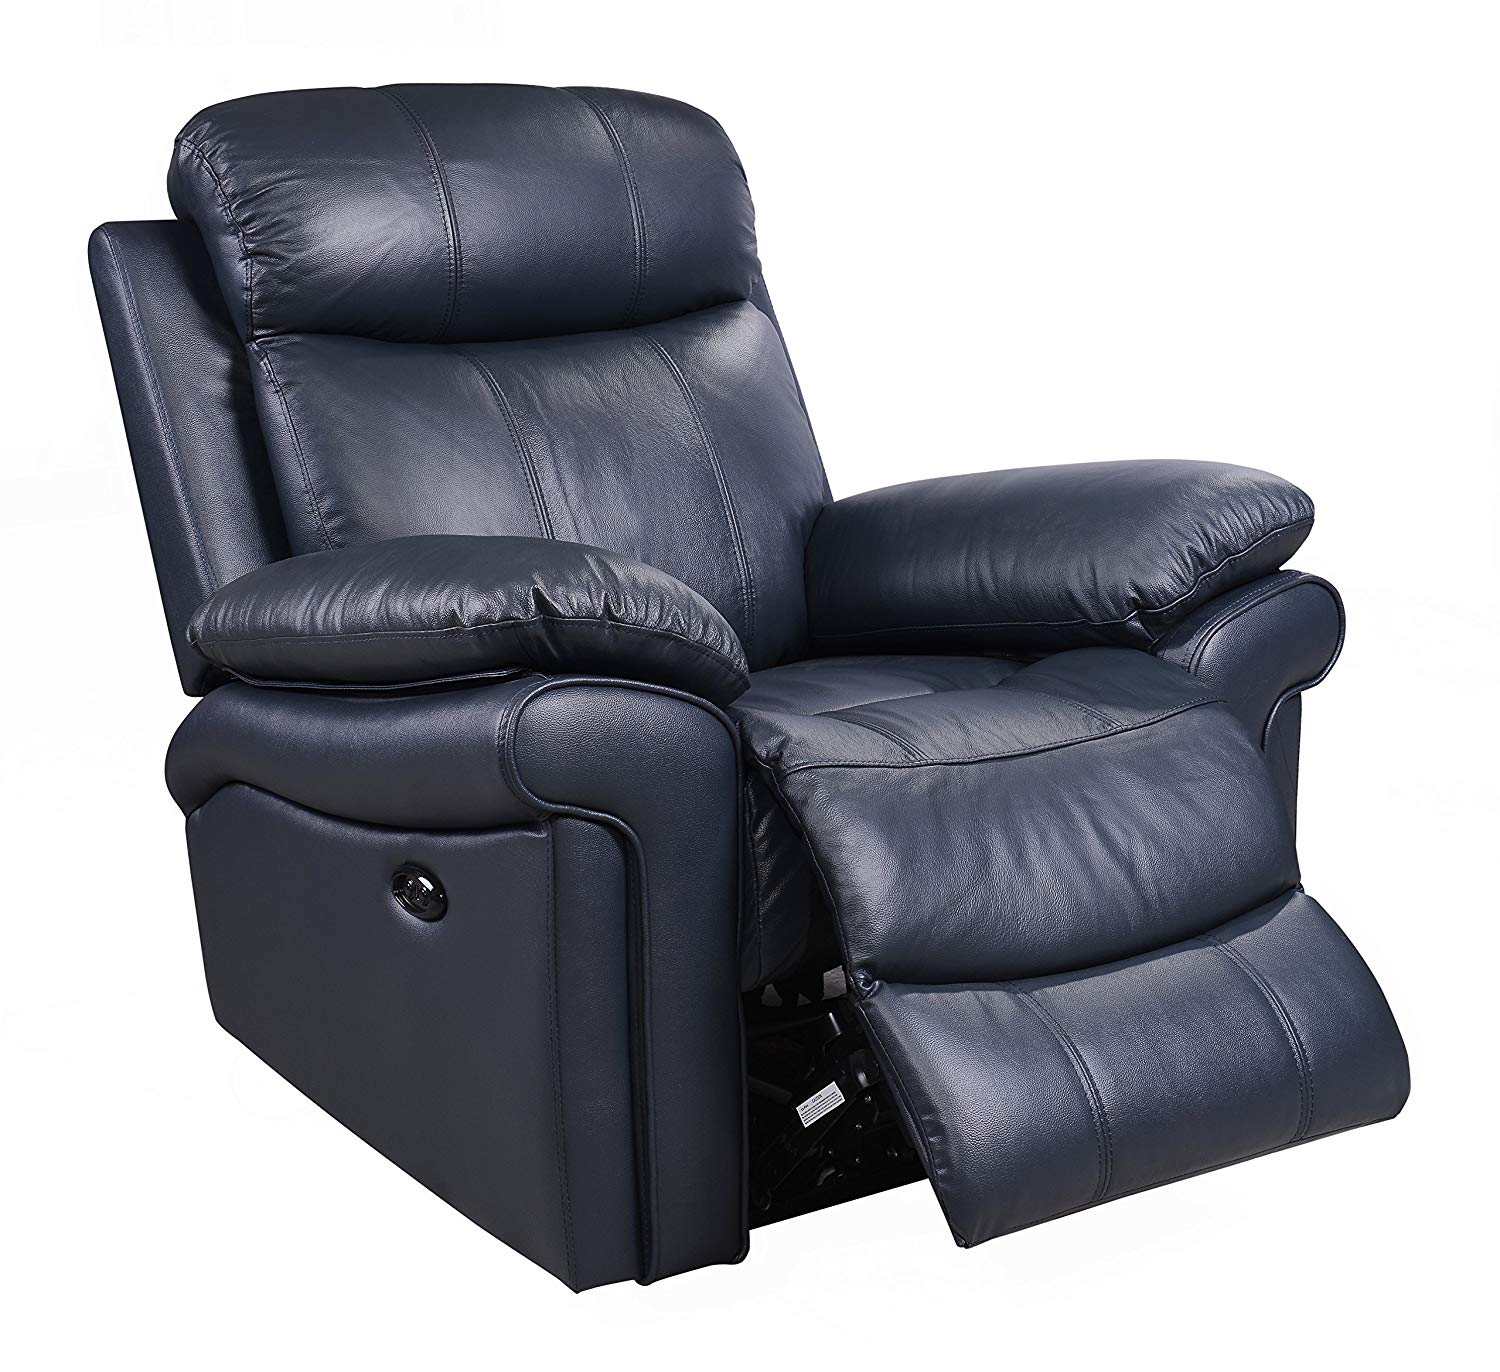 10 Best Real Leather Recliner Chairs 2021 - Performance Tested